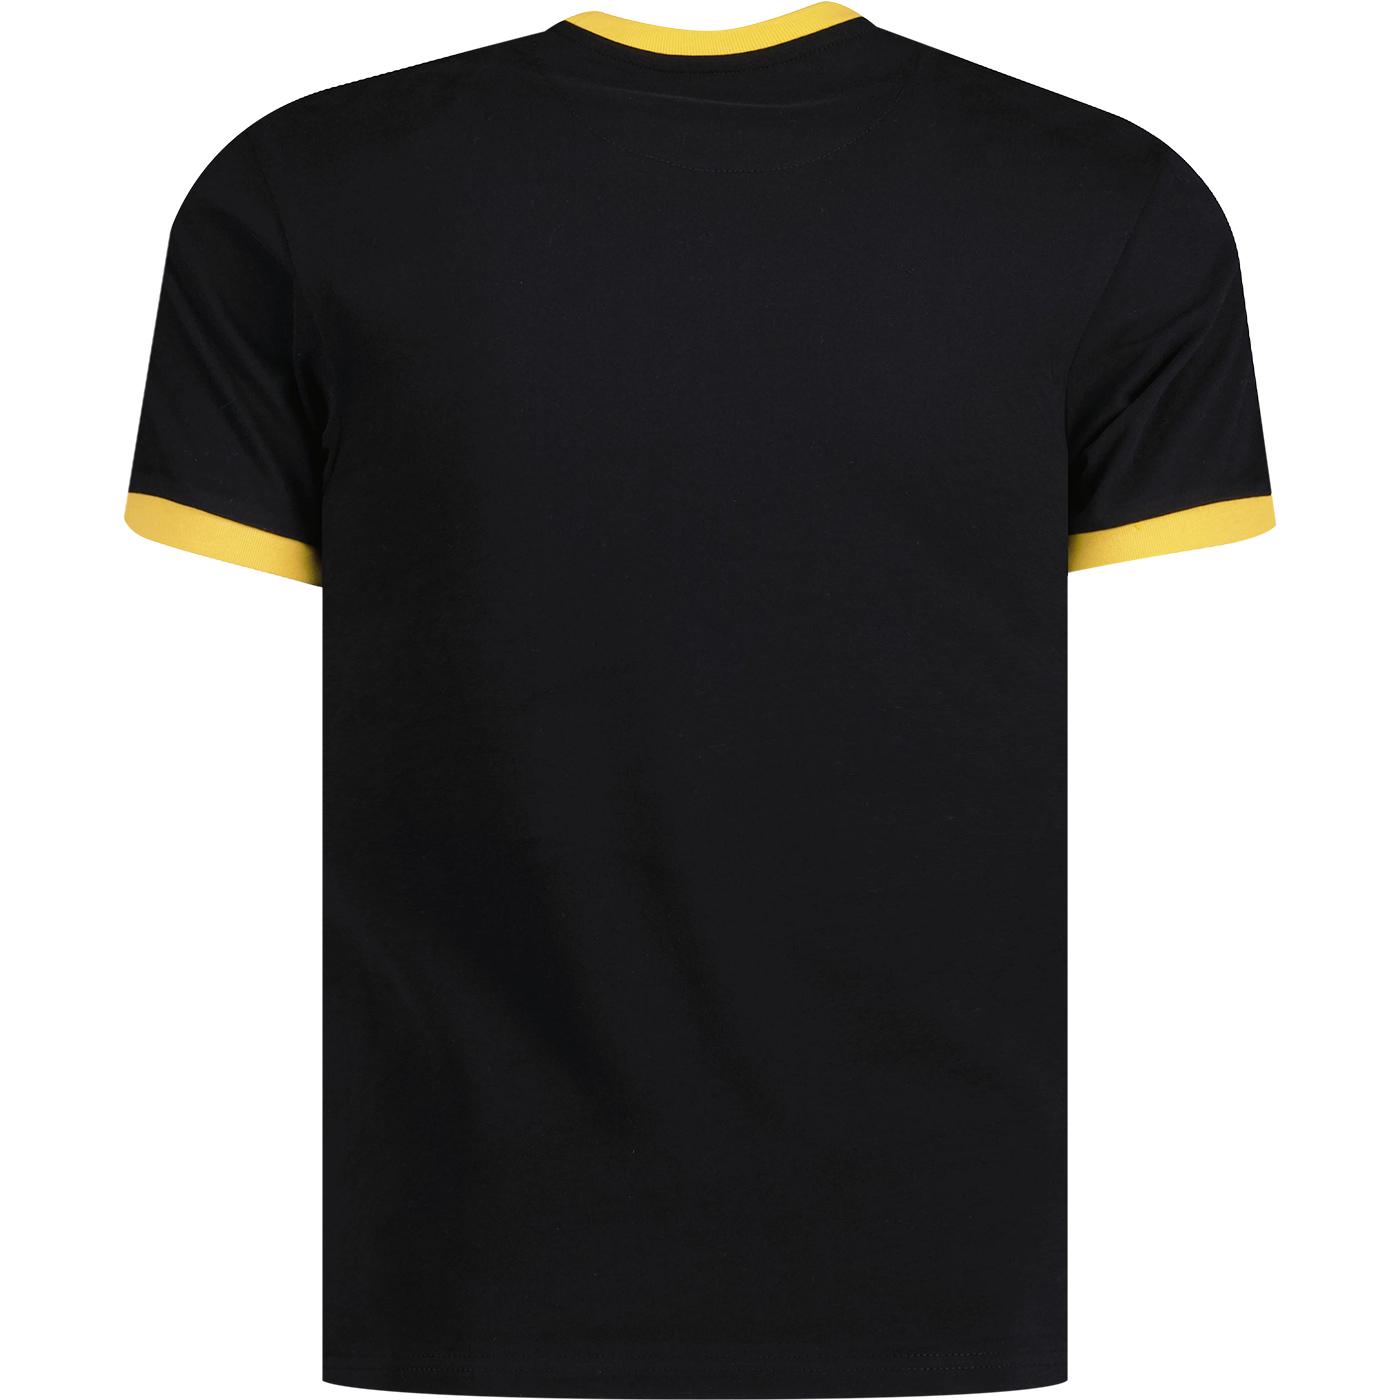 TROJAN RECORDS Outline Logo T-Shirt in Jamaica Colours